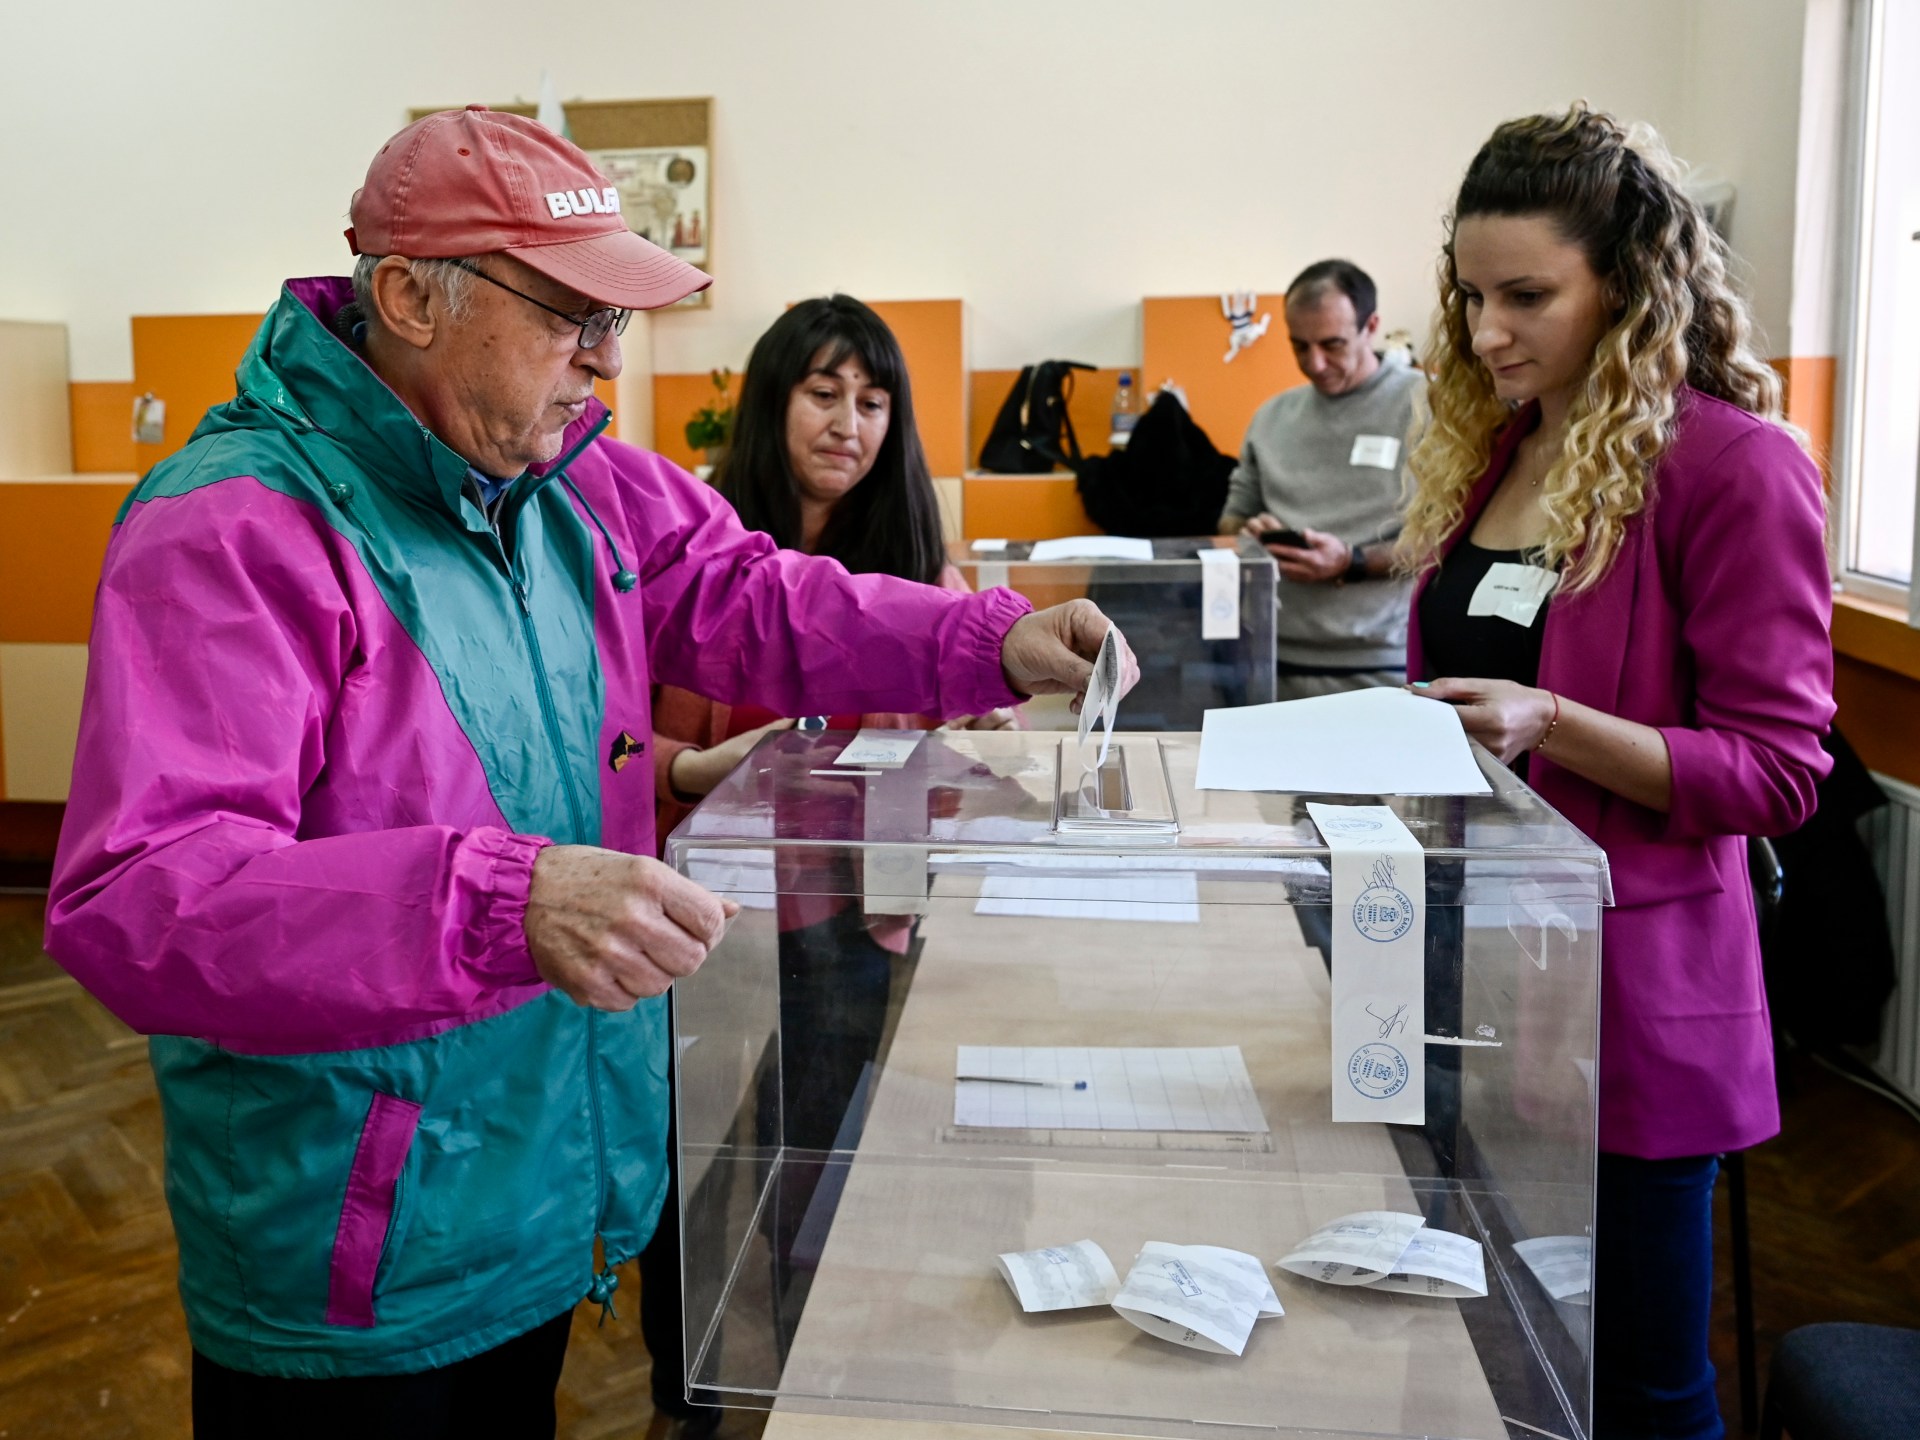 Bulgarians vote in fifth parliamentary elections in two years | Information